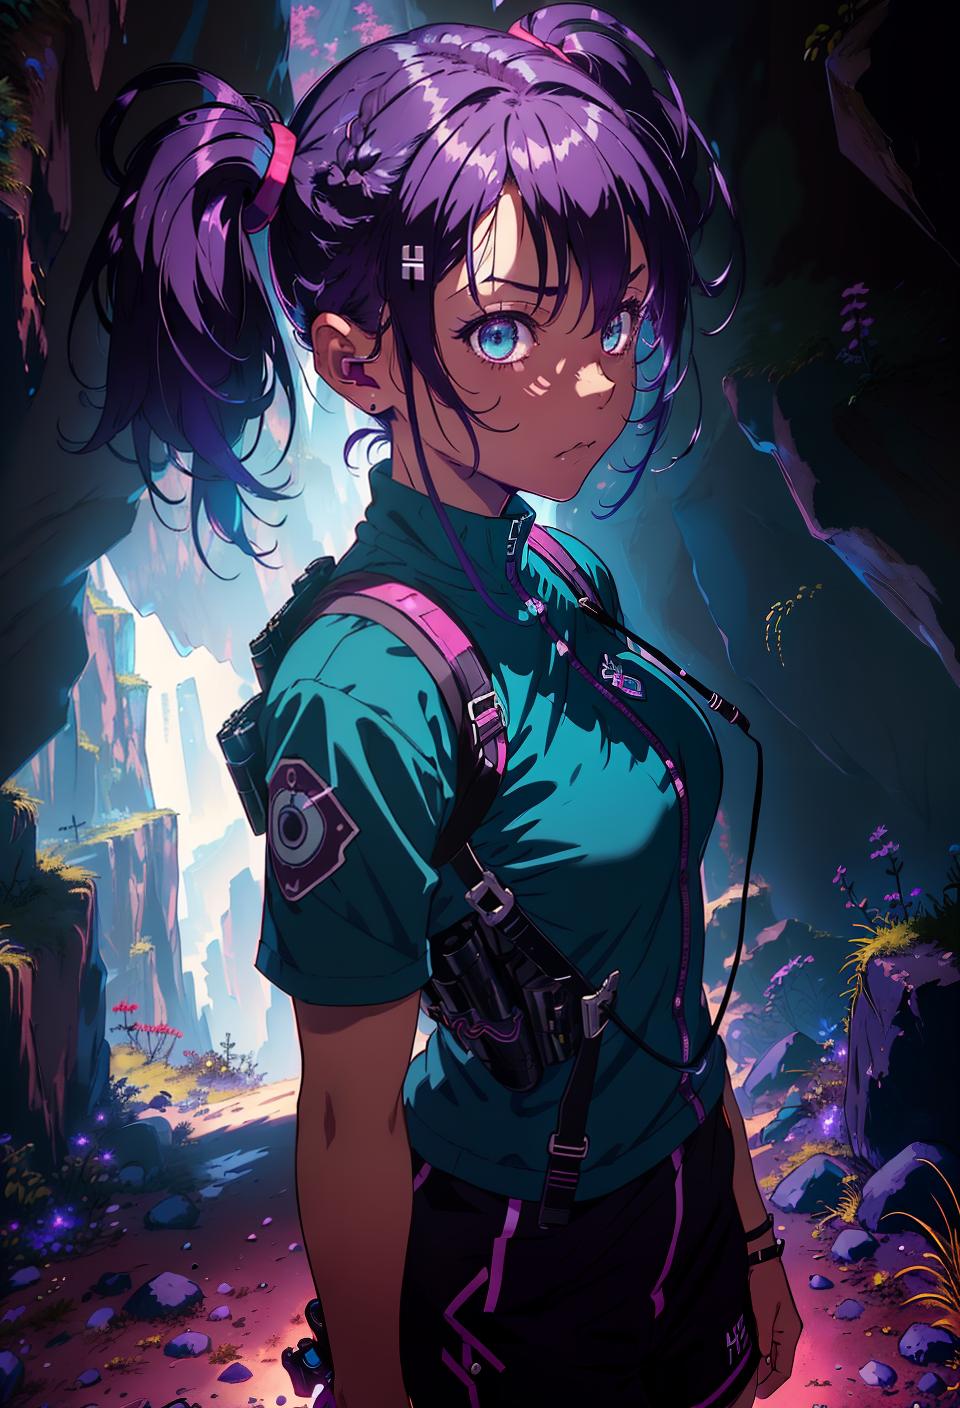  ((trending, highres, masterpiece, cinematic shot)), 1girl, mature, female hiking gear, large, dark cavern scene, short spiked purple hair, twintails hairstyle, narrow aqua eyes, personality, sad expression, very dark skin, orderly, clever